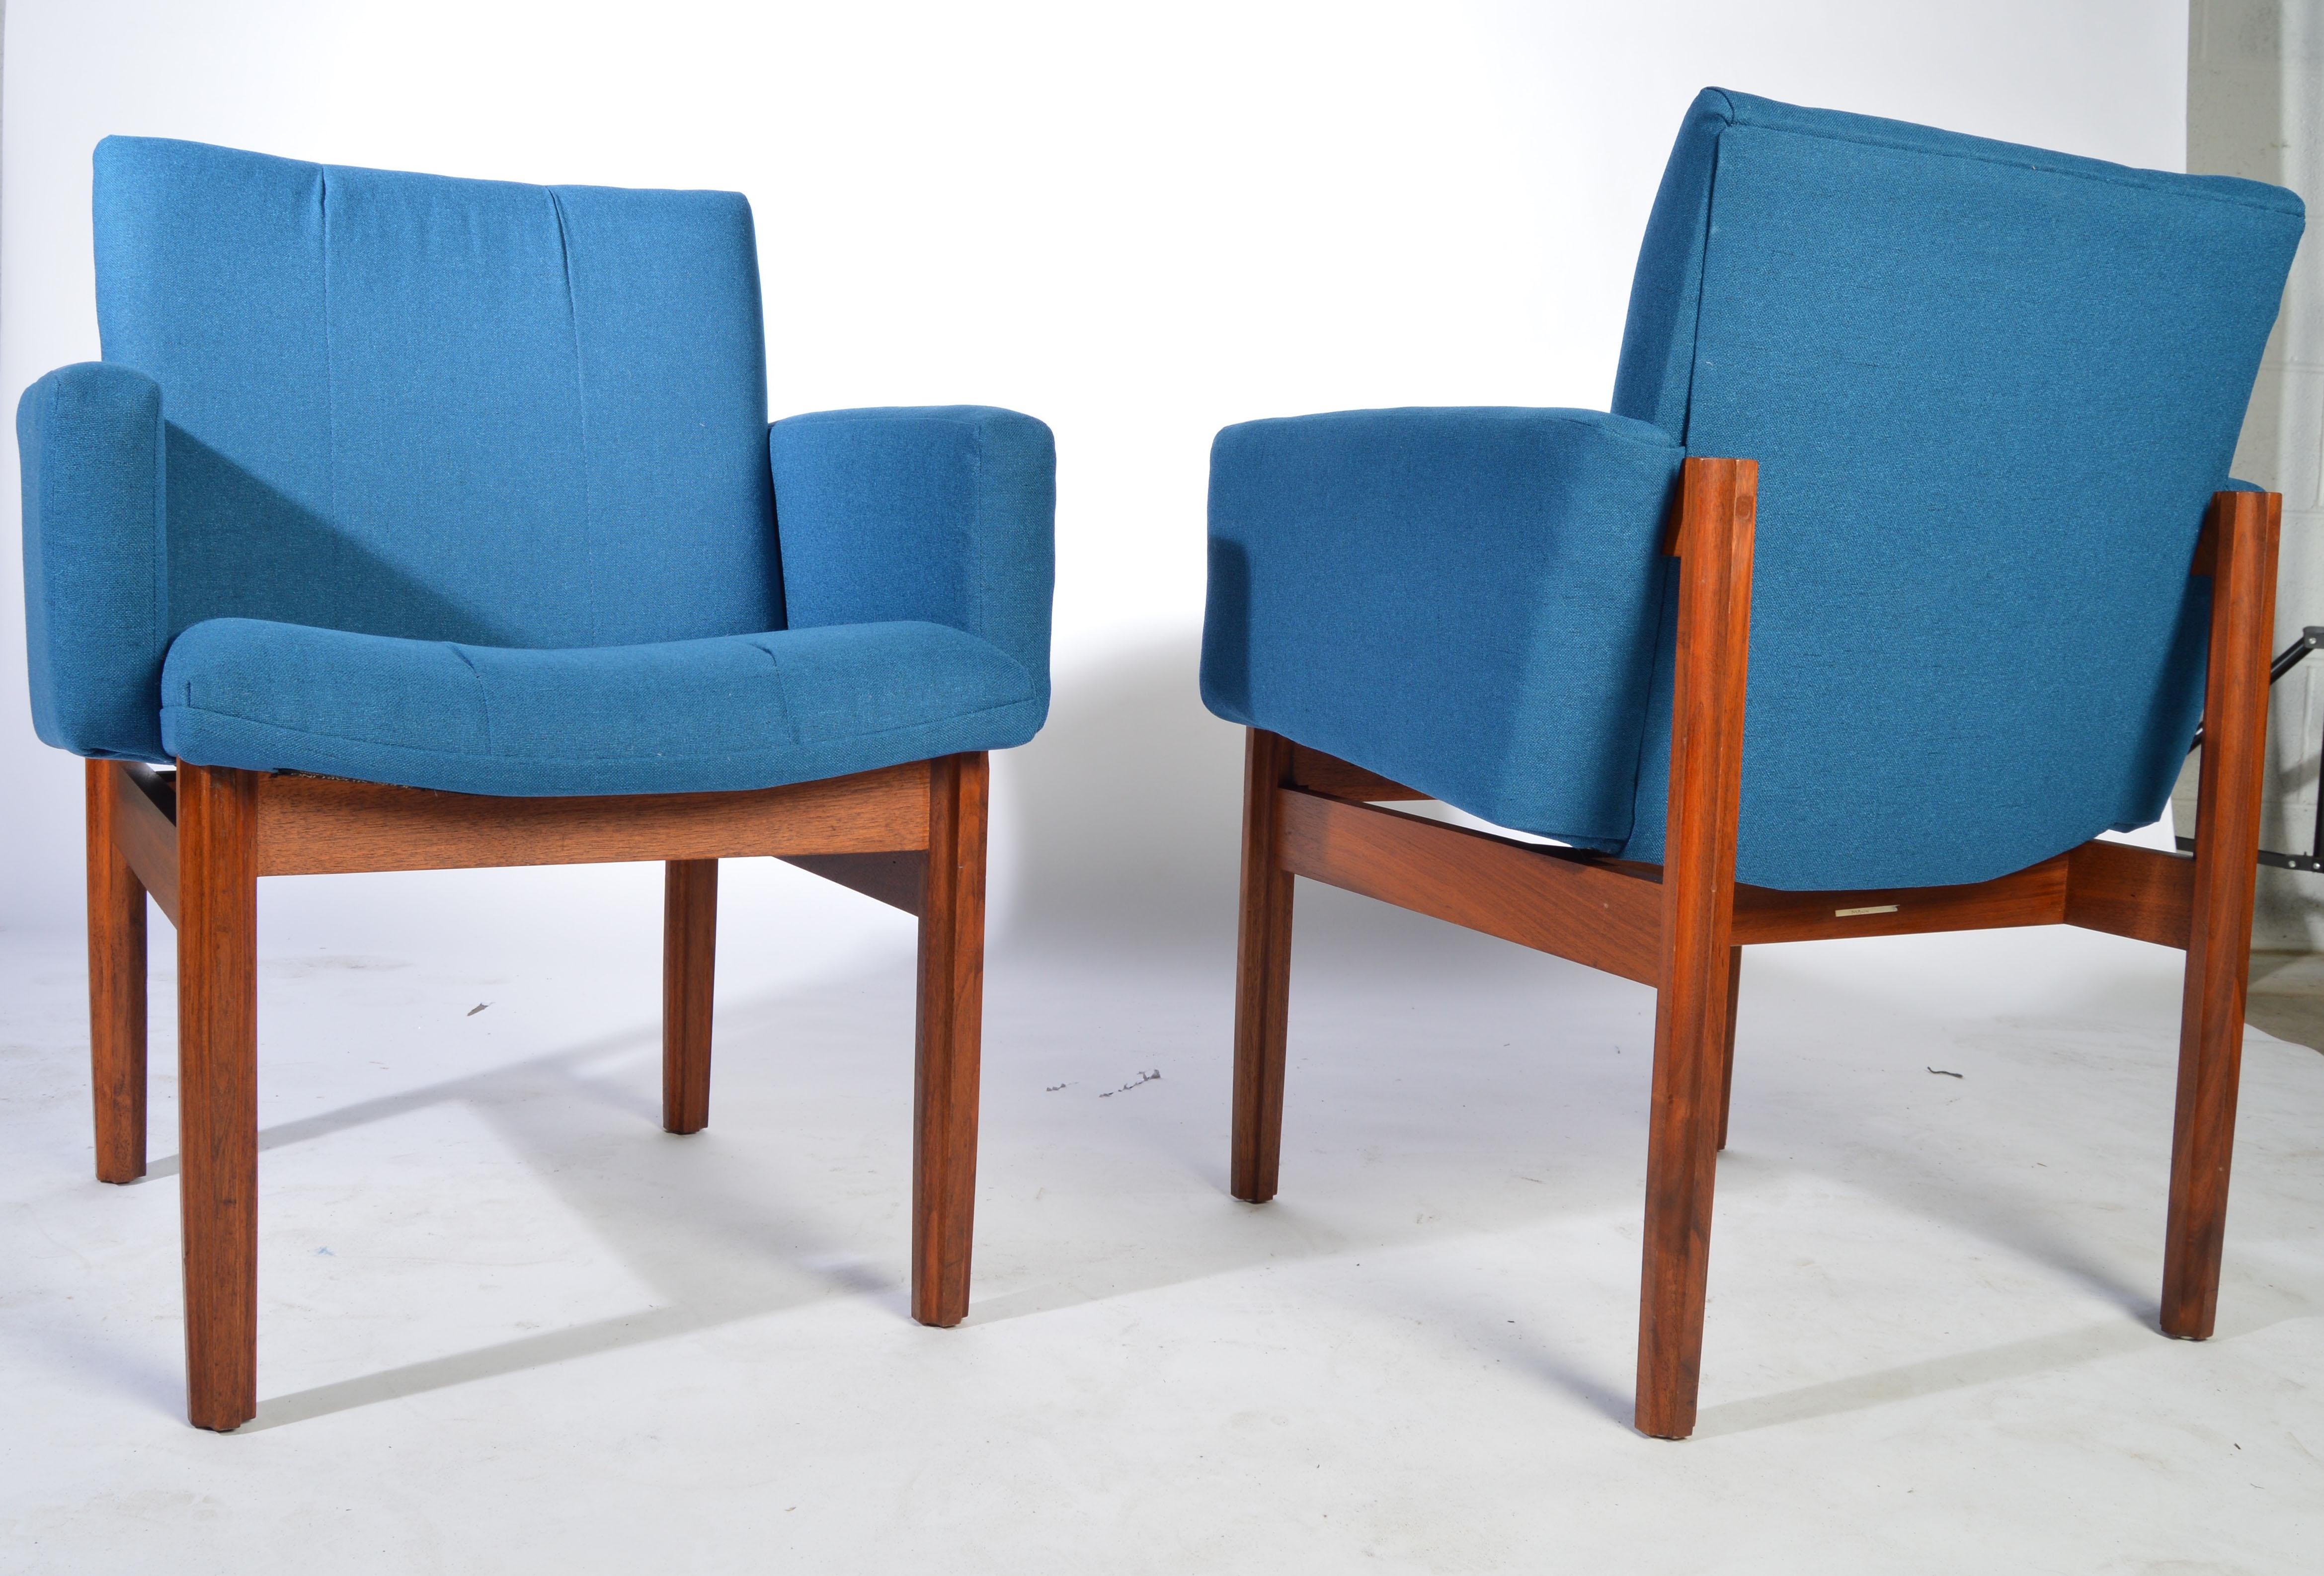 A pair of John Stuart armchairs after Jens Risom having unique teak frames and beautiful, brand new tight tweed upholstery and cushioning,
circa 1950.
Original labels attached to both chairs.